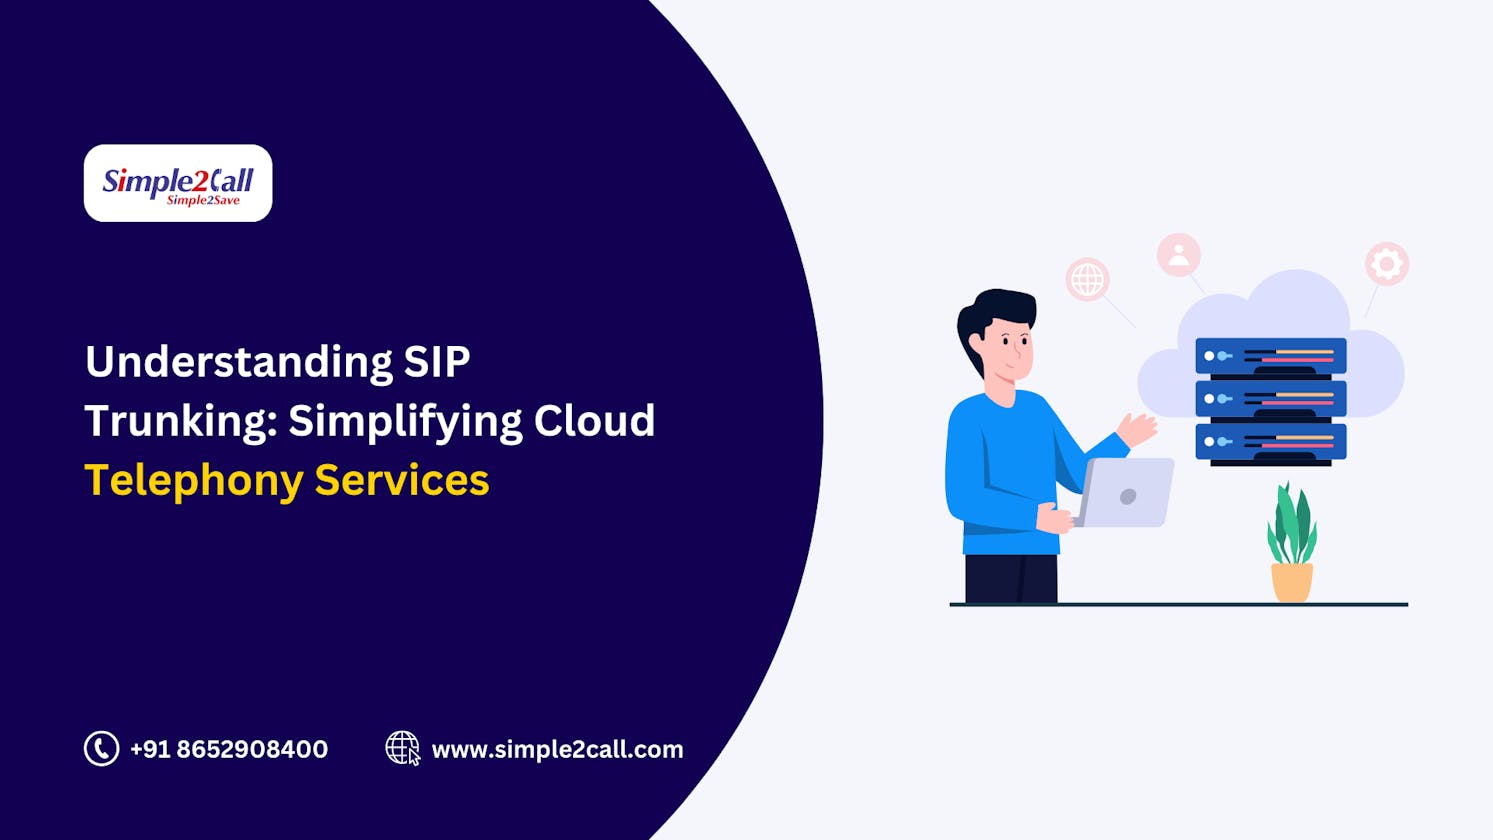 Understanding SIP Trunking: Simplifying Cloud Telephony Services